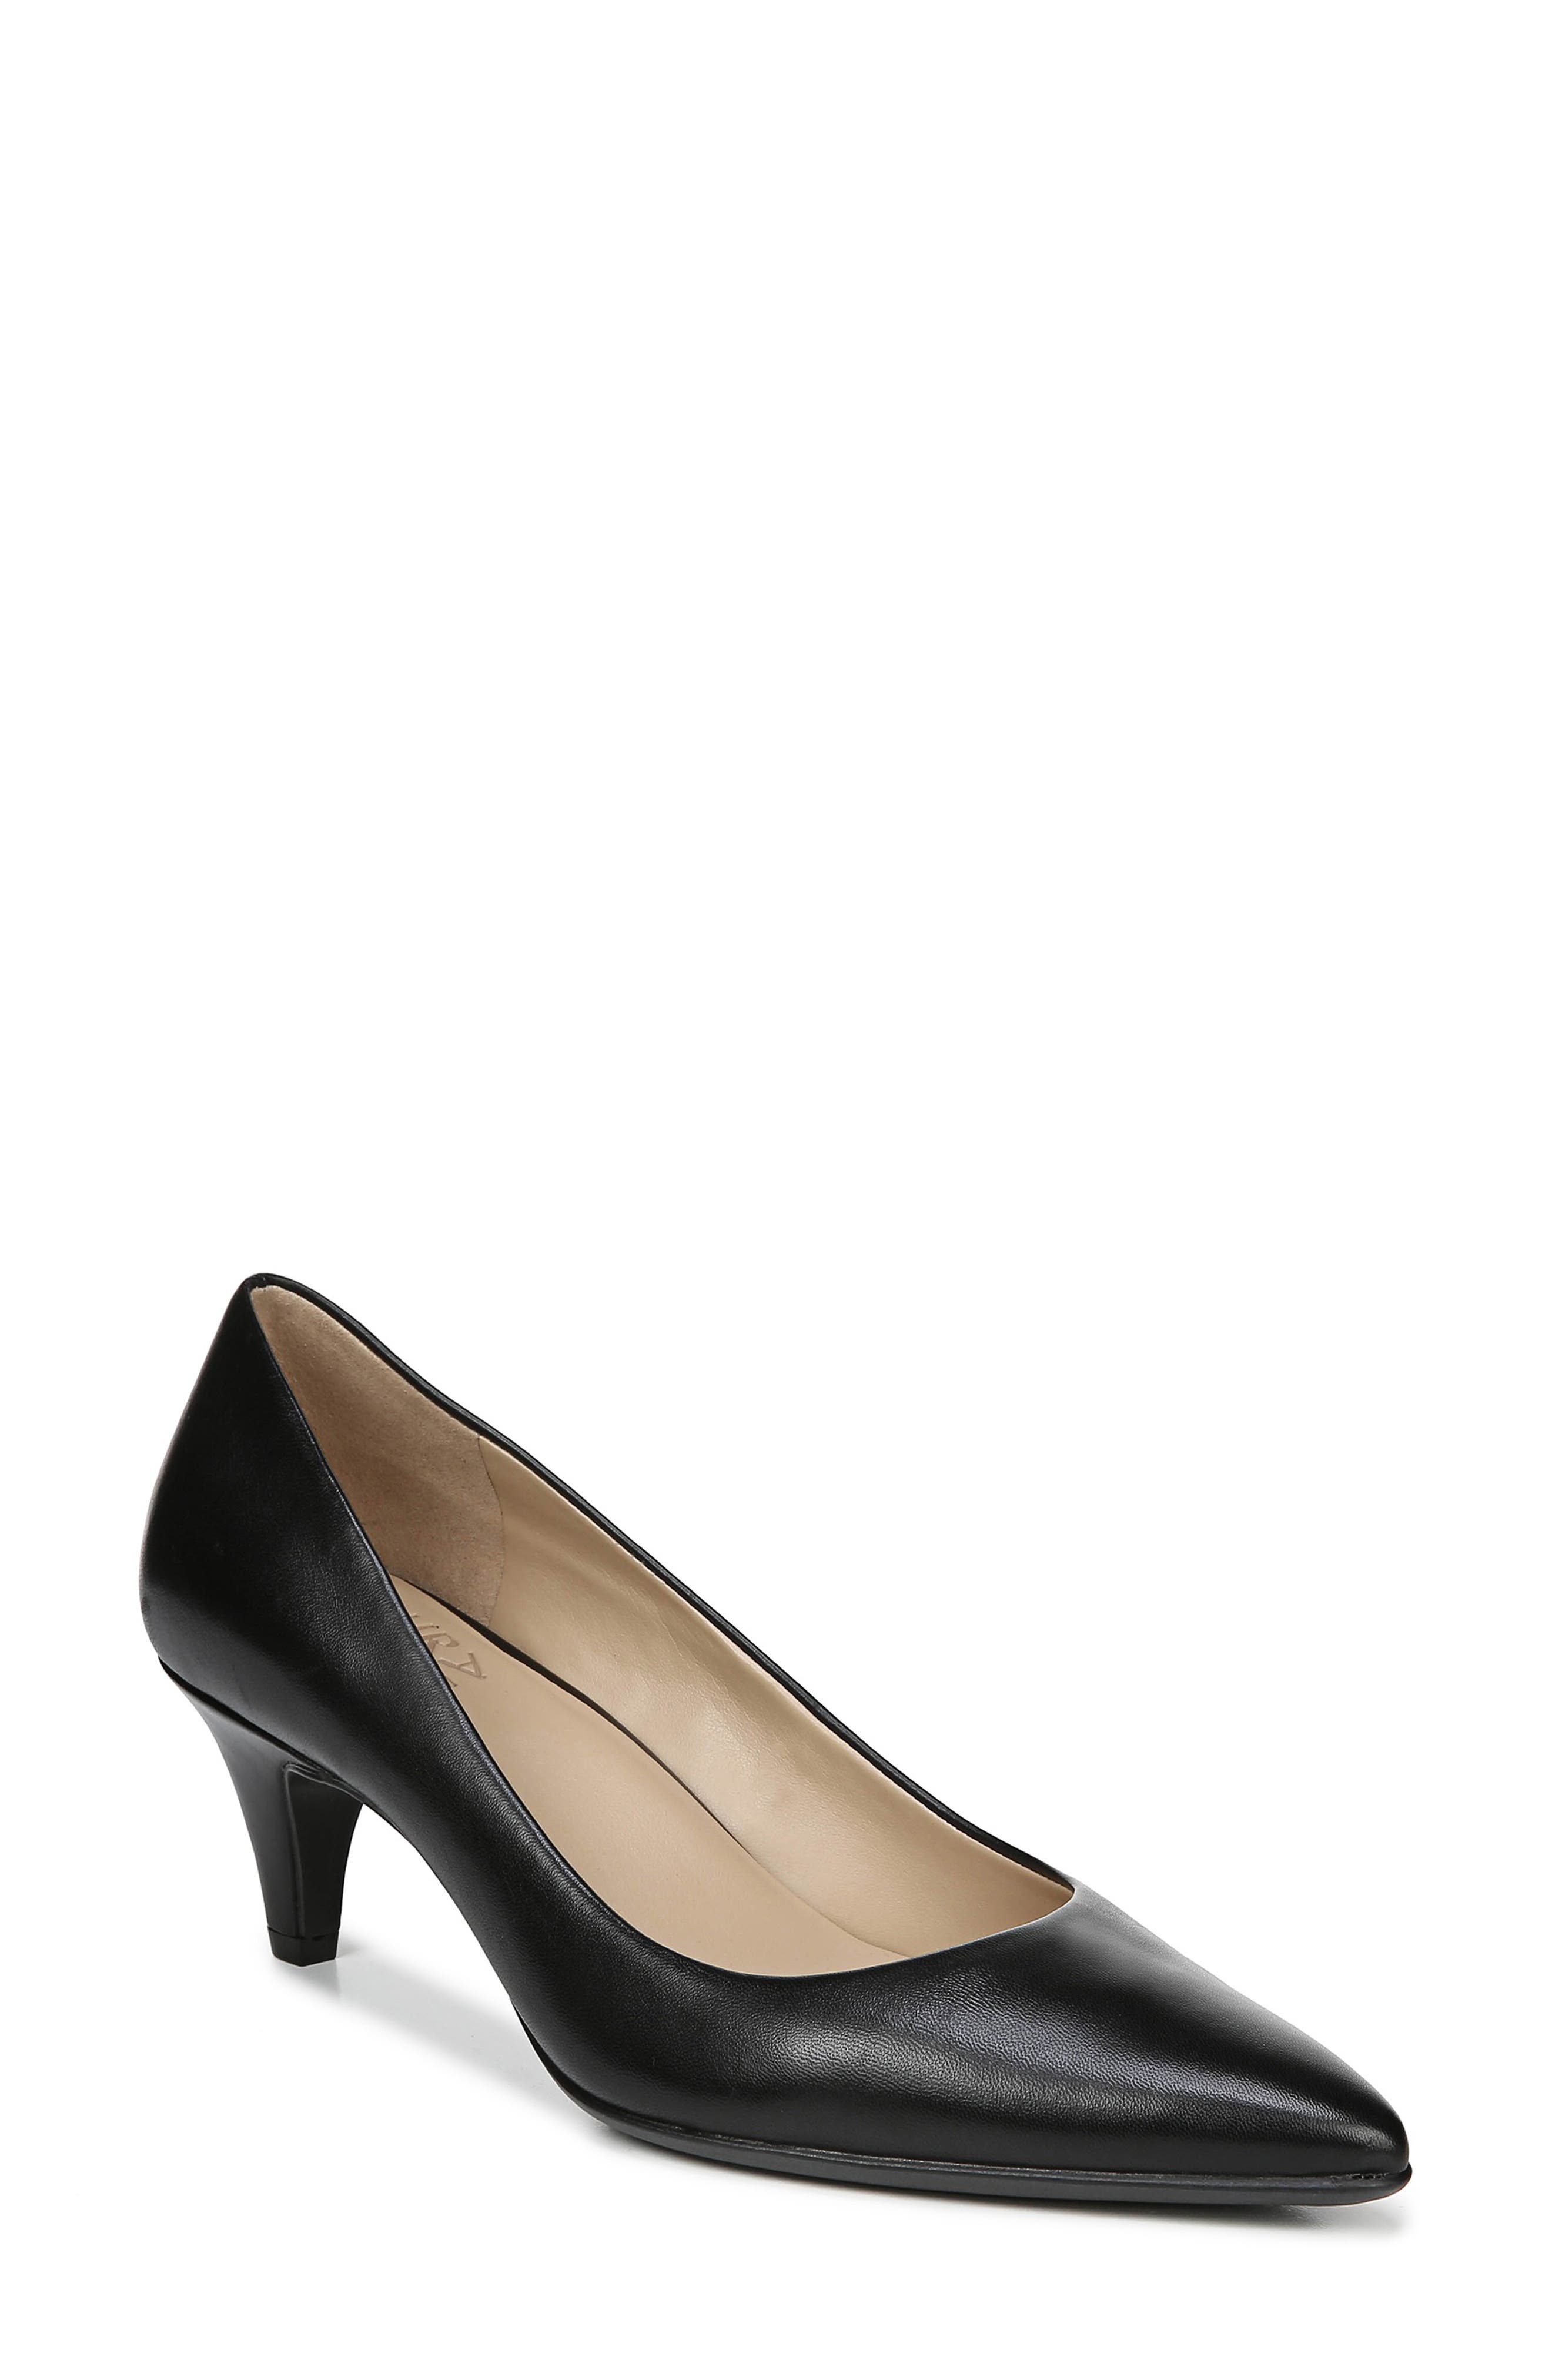 nordstrom wide width womens shoes